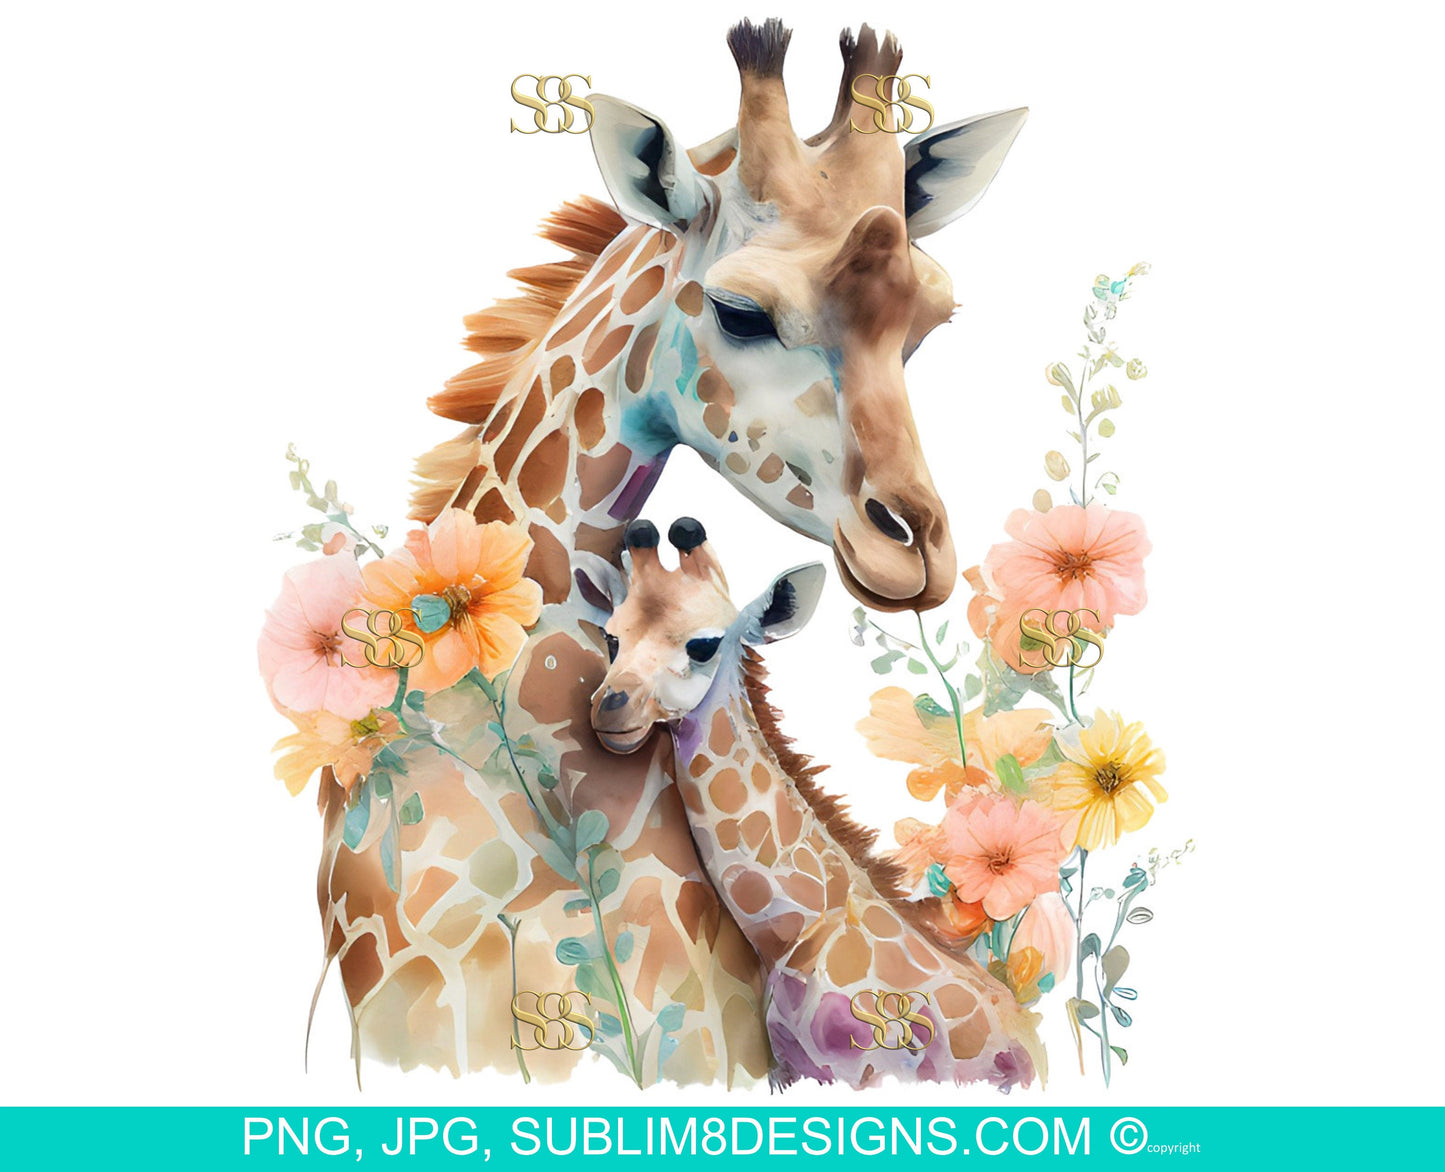 Motherly Love: A Pastel Image of Giraffes Cuddling with Peachy Flowers Sublimation Design PNG and JPEG ONLY